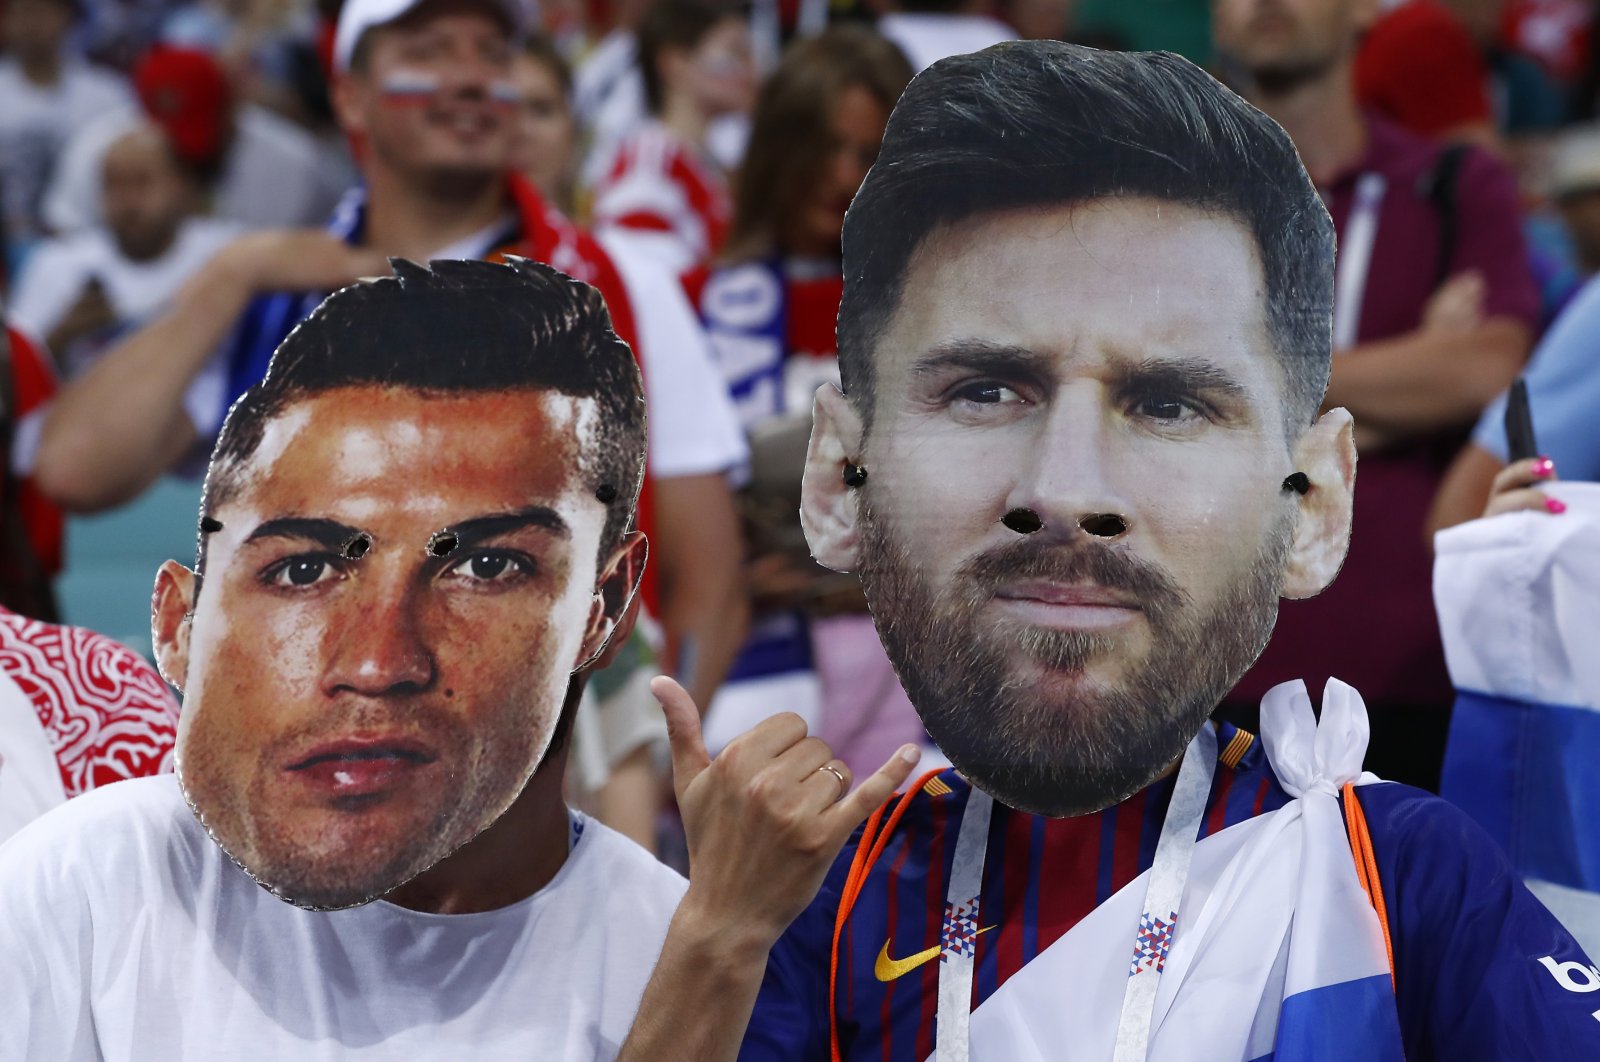 Fans wear masks with the face of Cristiano Ronaldo (L) and Lionel Messi at the 2018 World Cup, Sochi, Russia, July 7, 2018. (AP Photo)